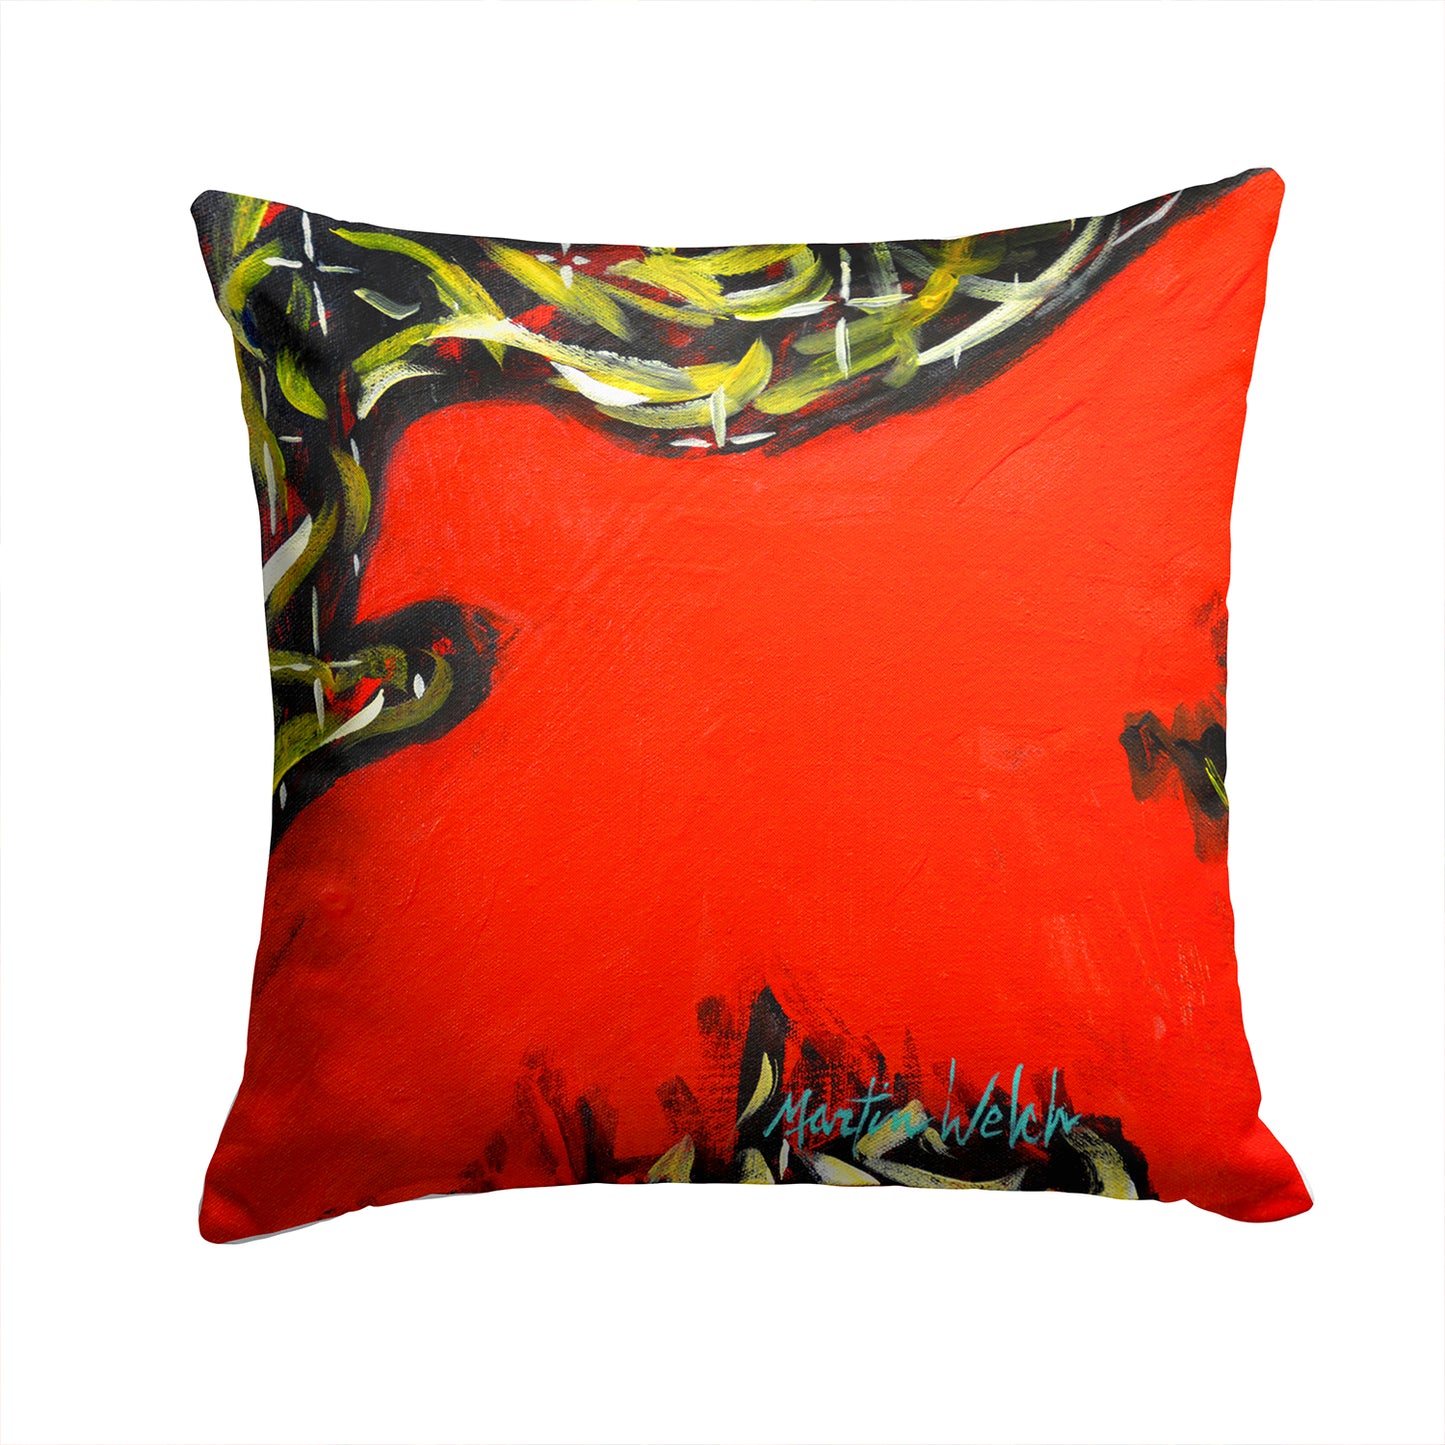 Buy this Scared Crow Fabric Decorative Pillow